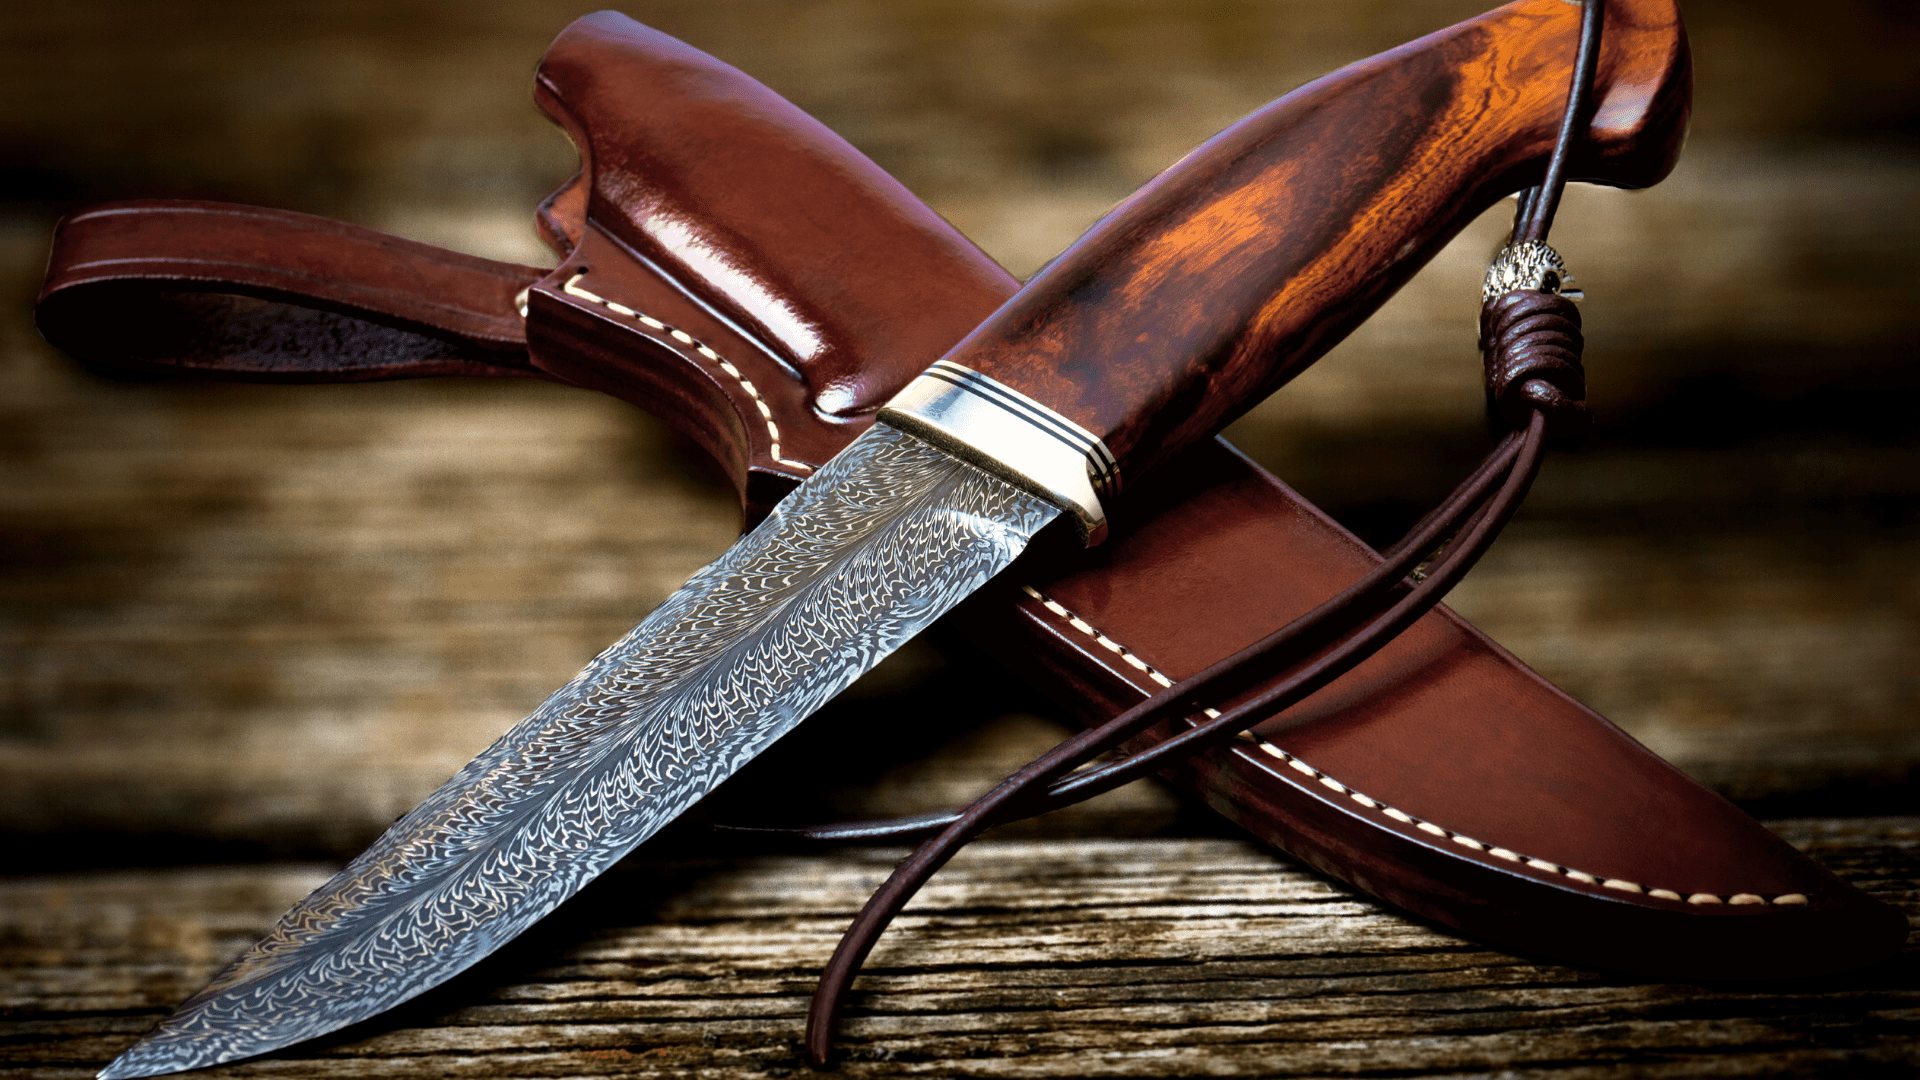 What's so special about Japanese Damascus steel?